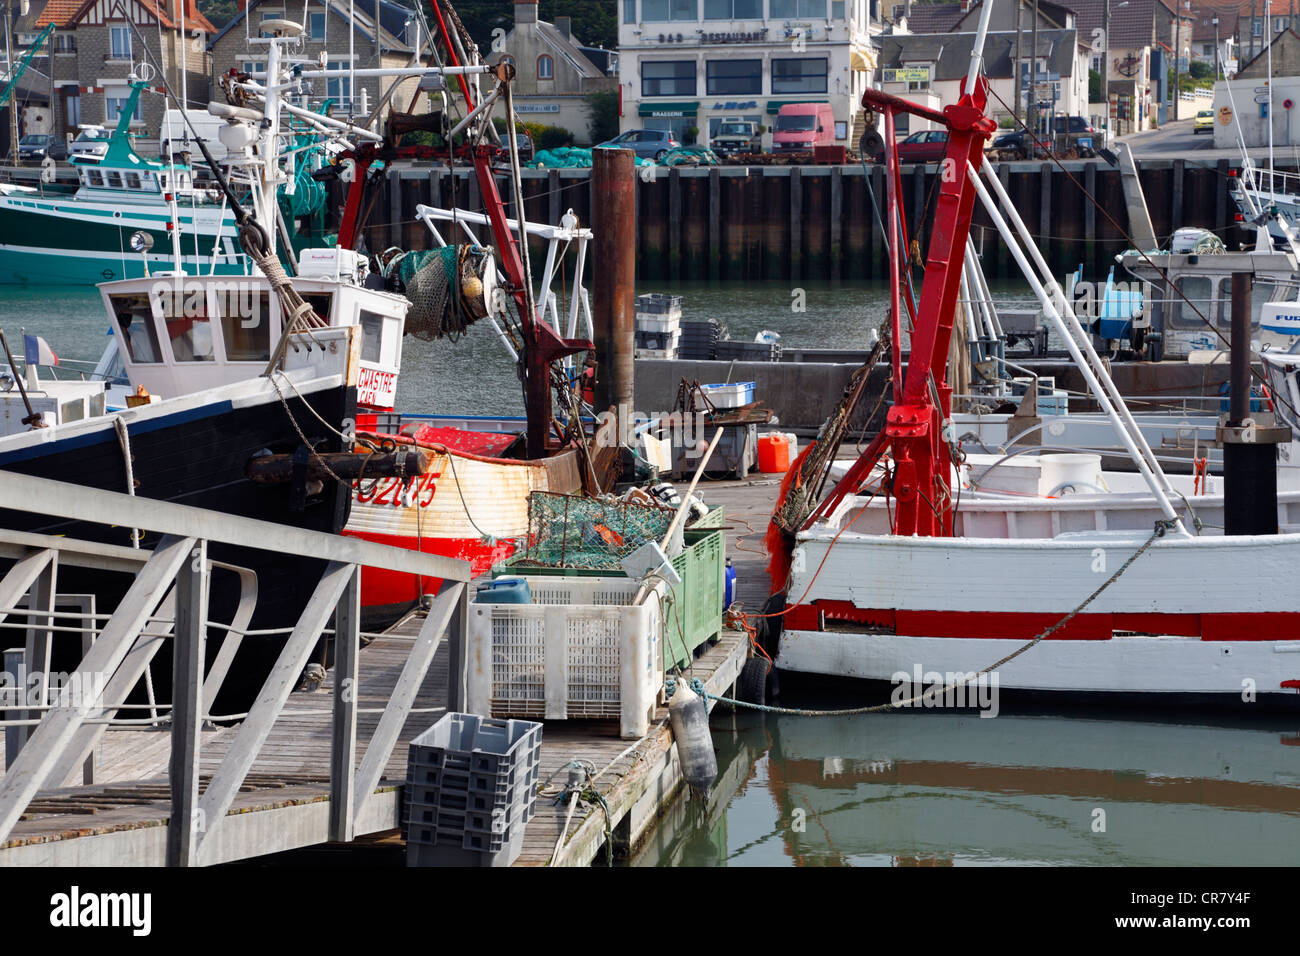 Gangway, landing stage, fish boxes and crates, and fishing vessels in the harbour of Grandcamp-Maisy, Normandy, France Stock Photo